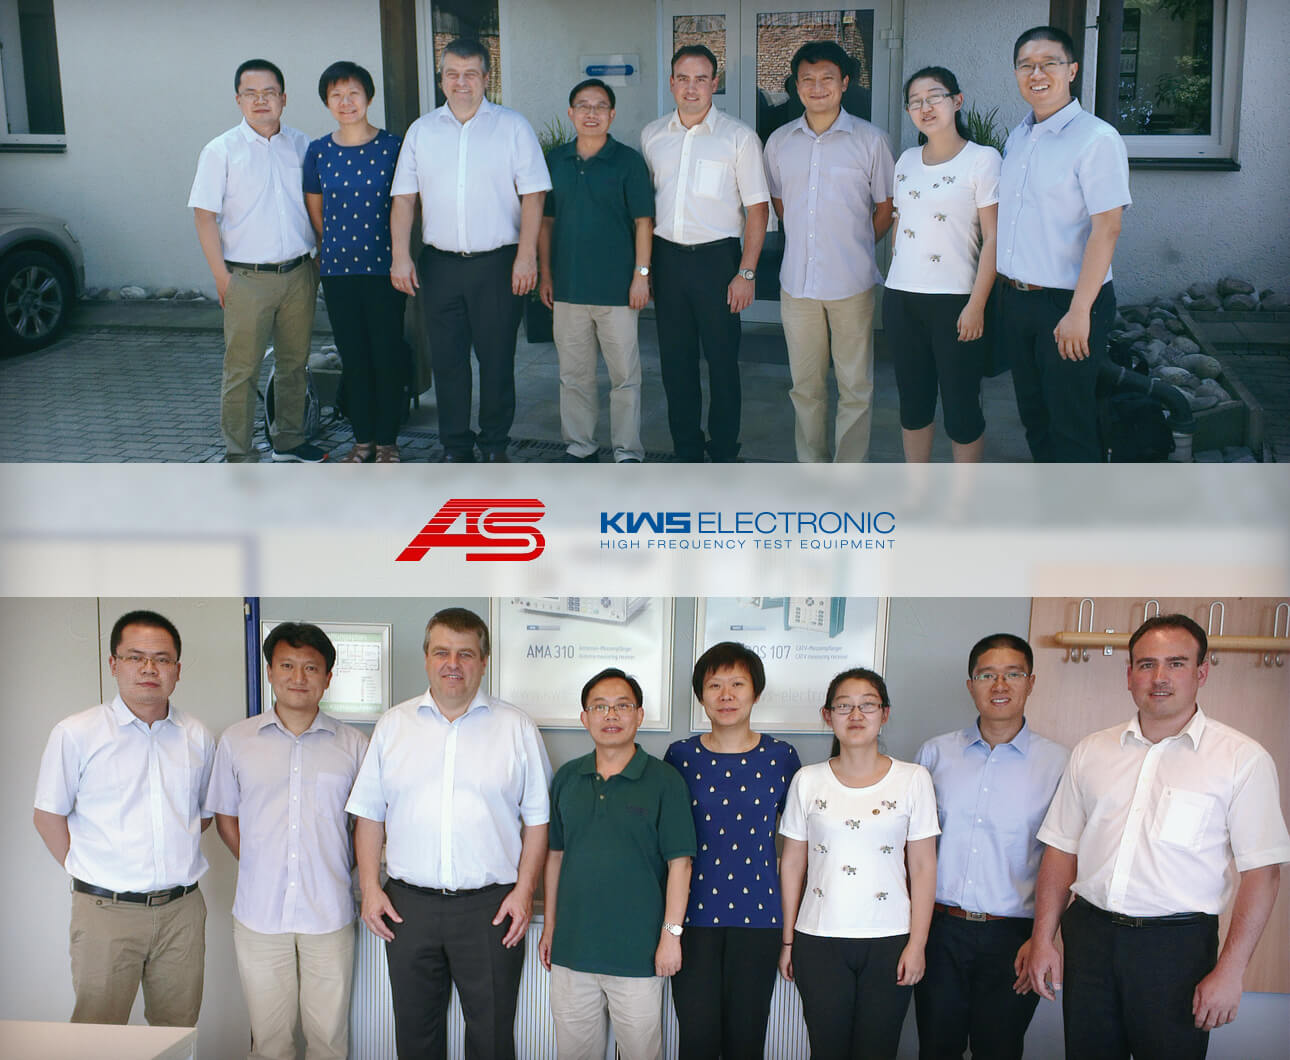 KWS Electronic: First ABS visit from china